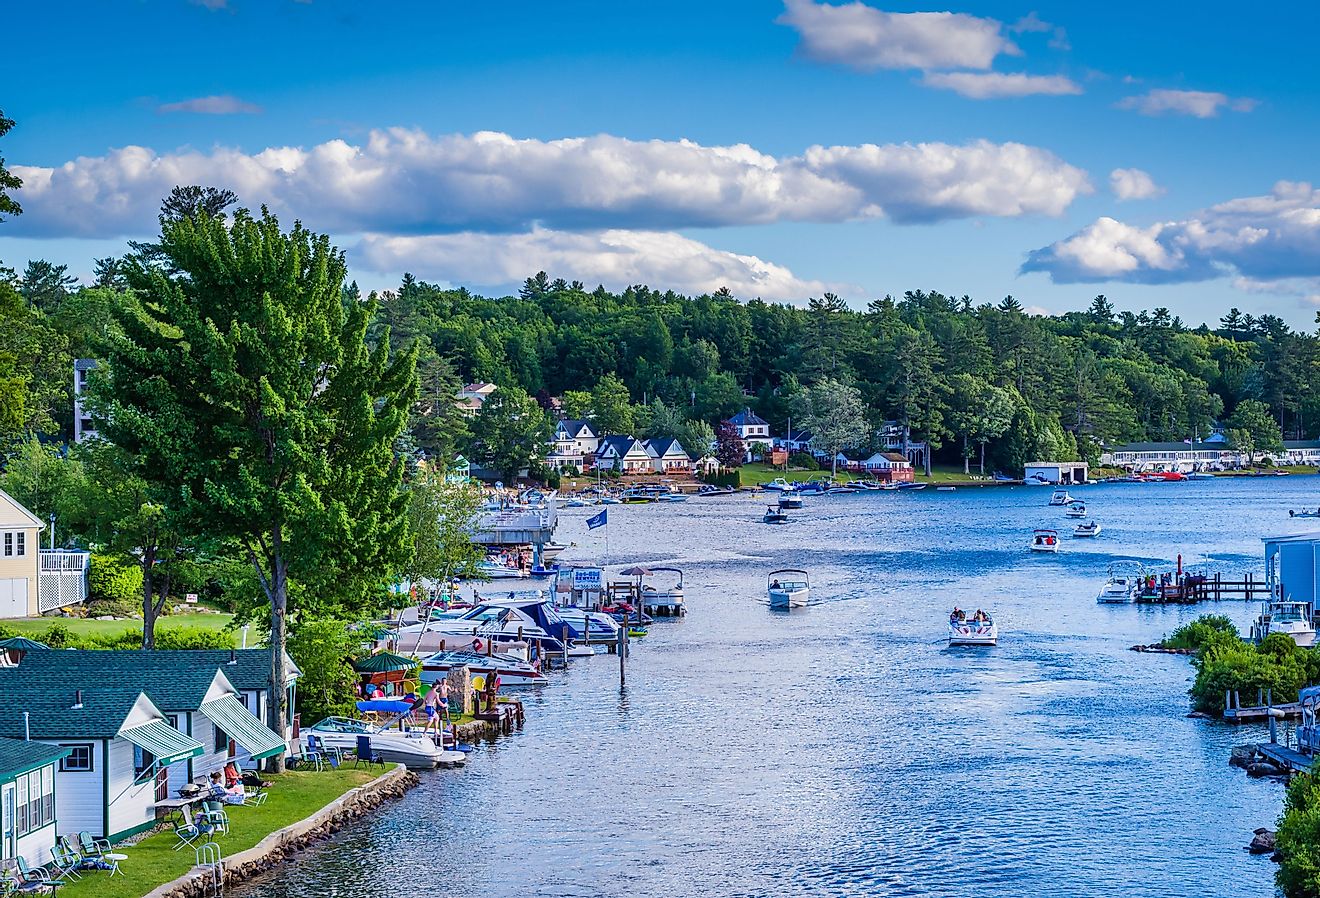 View of boats in Paugus Bay, Weirs Beach, Laconia, New Hampshire.